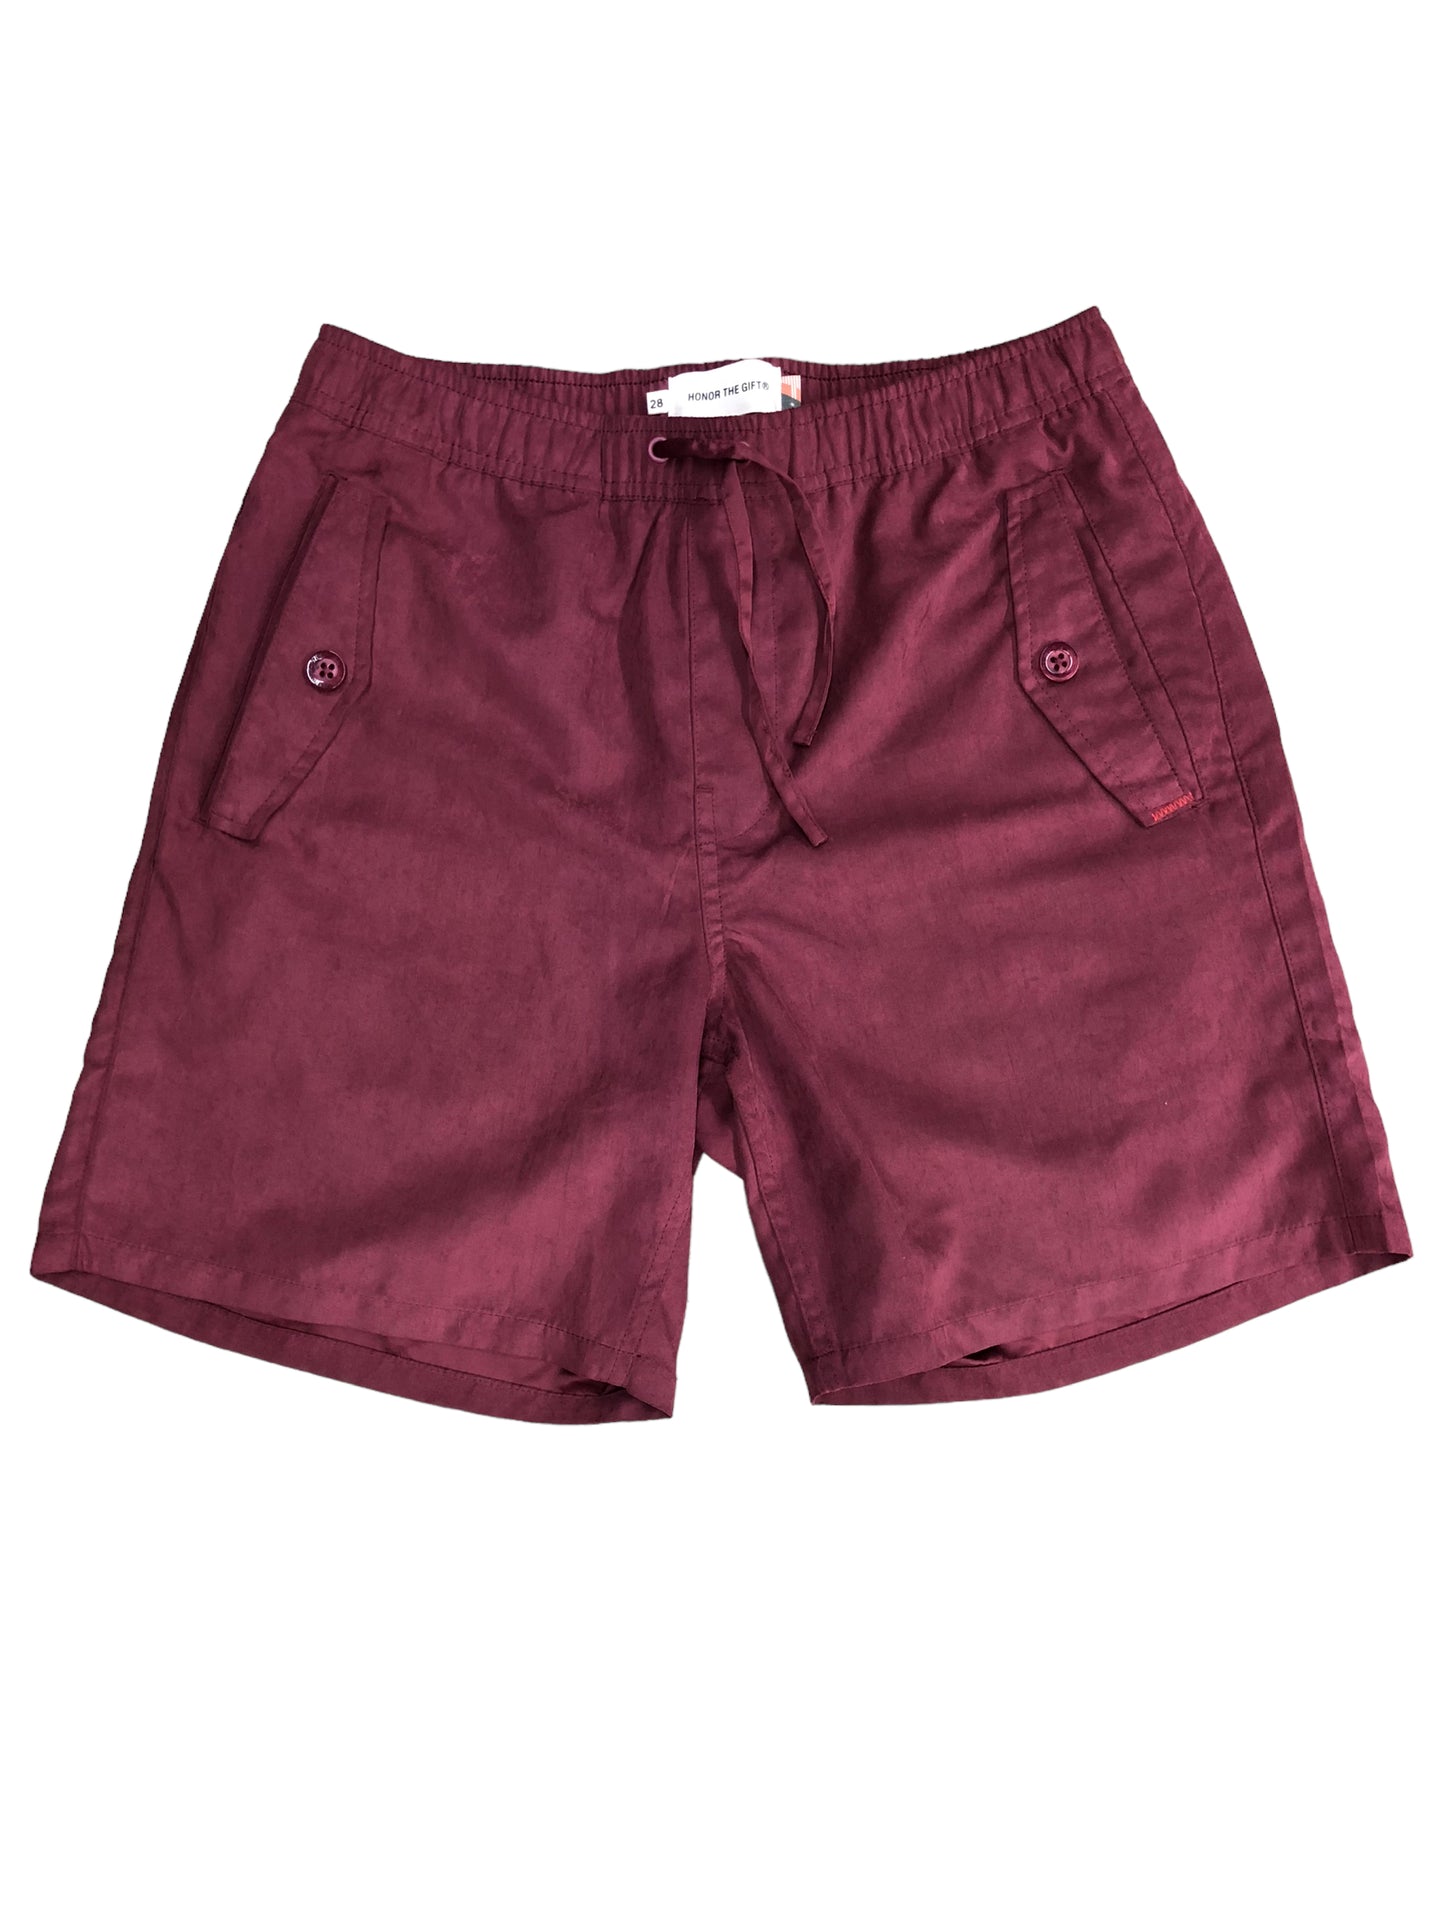 Honor The Gift Sonic Brushed Maroon Shorts Sz 28